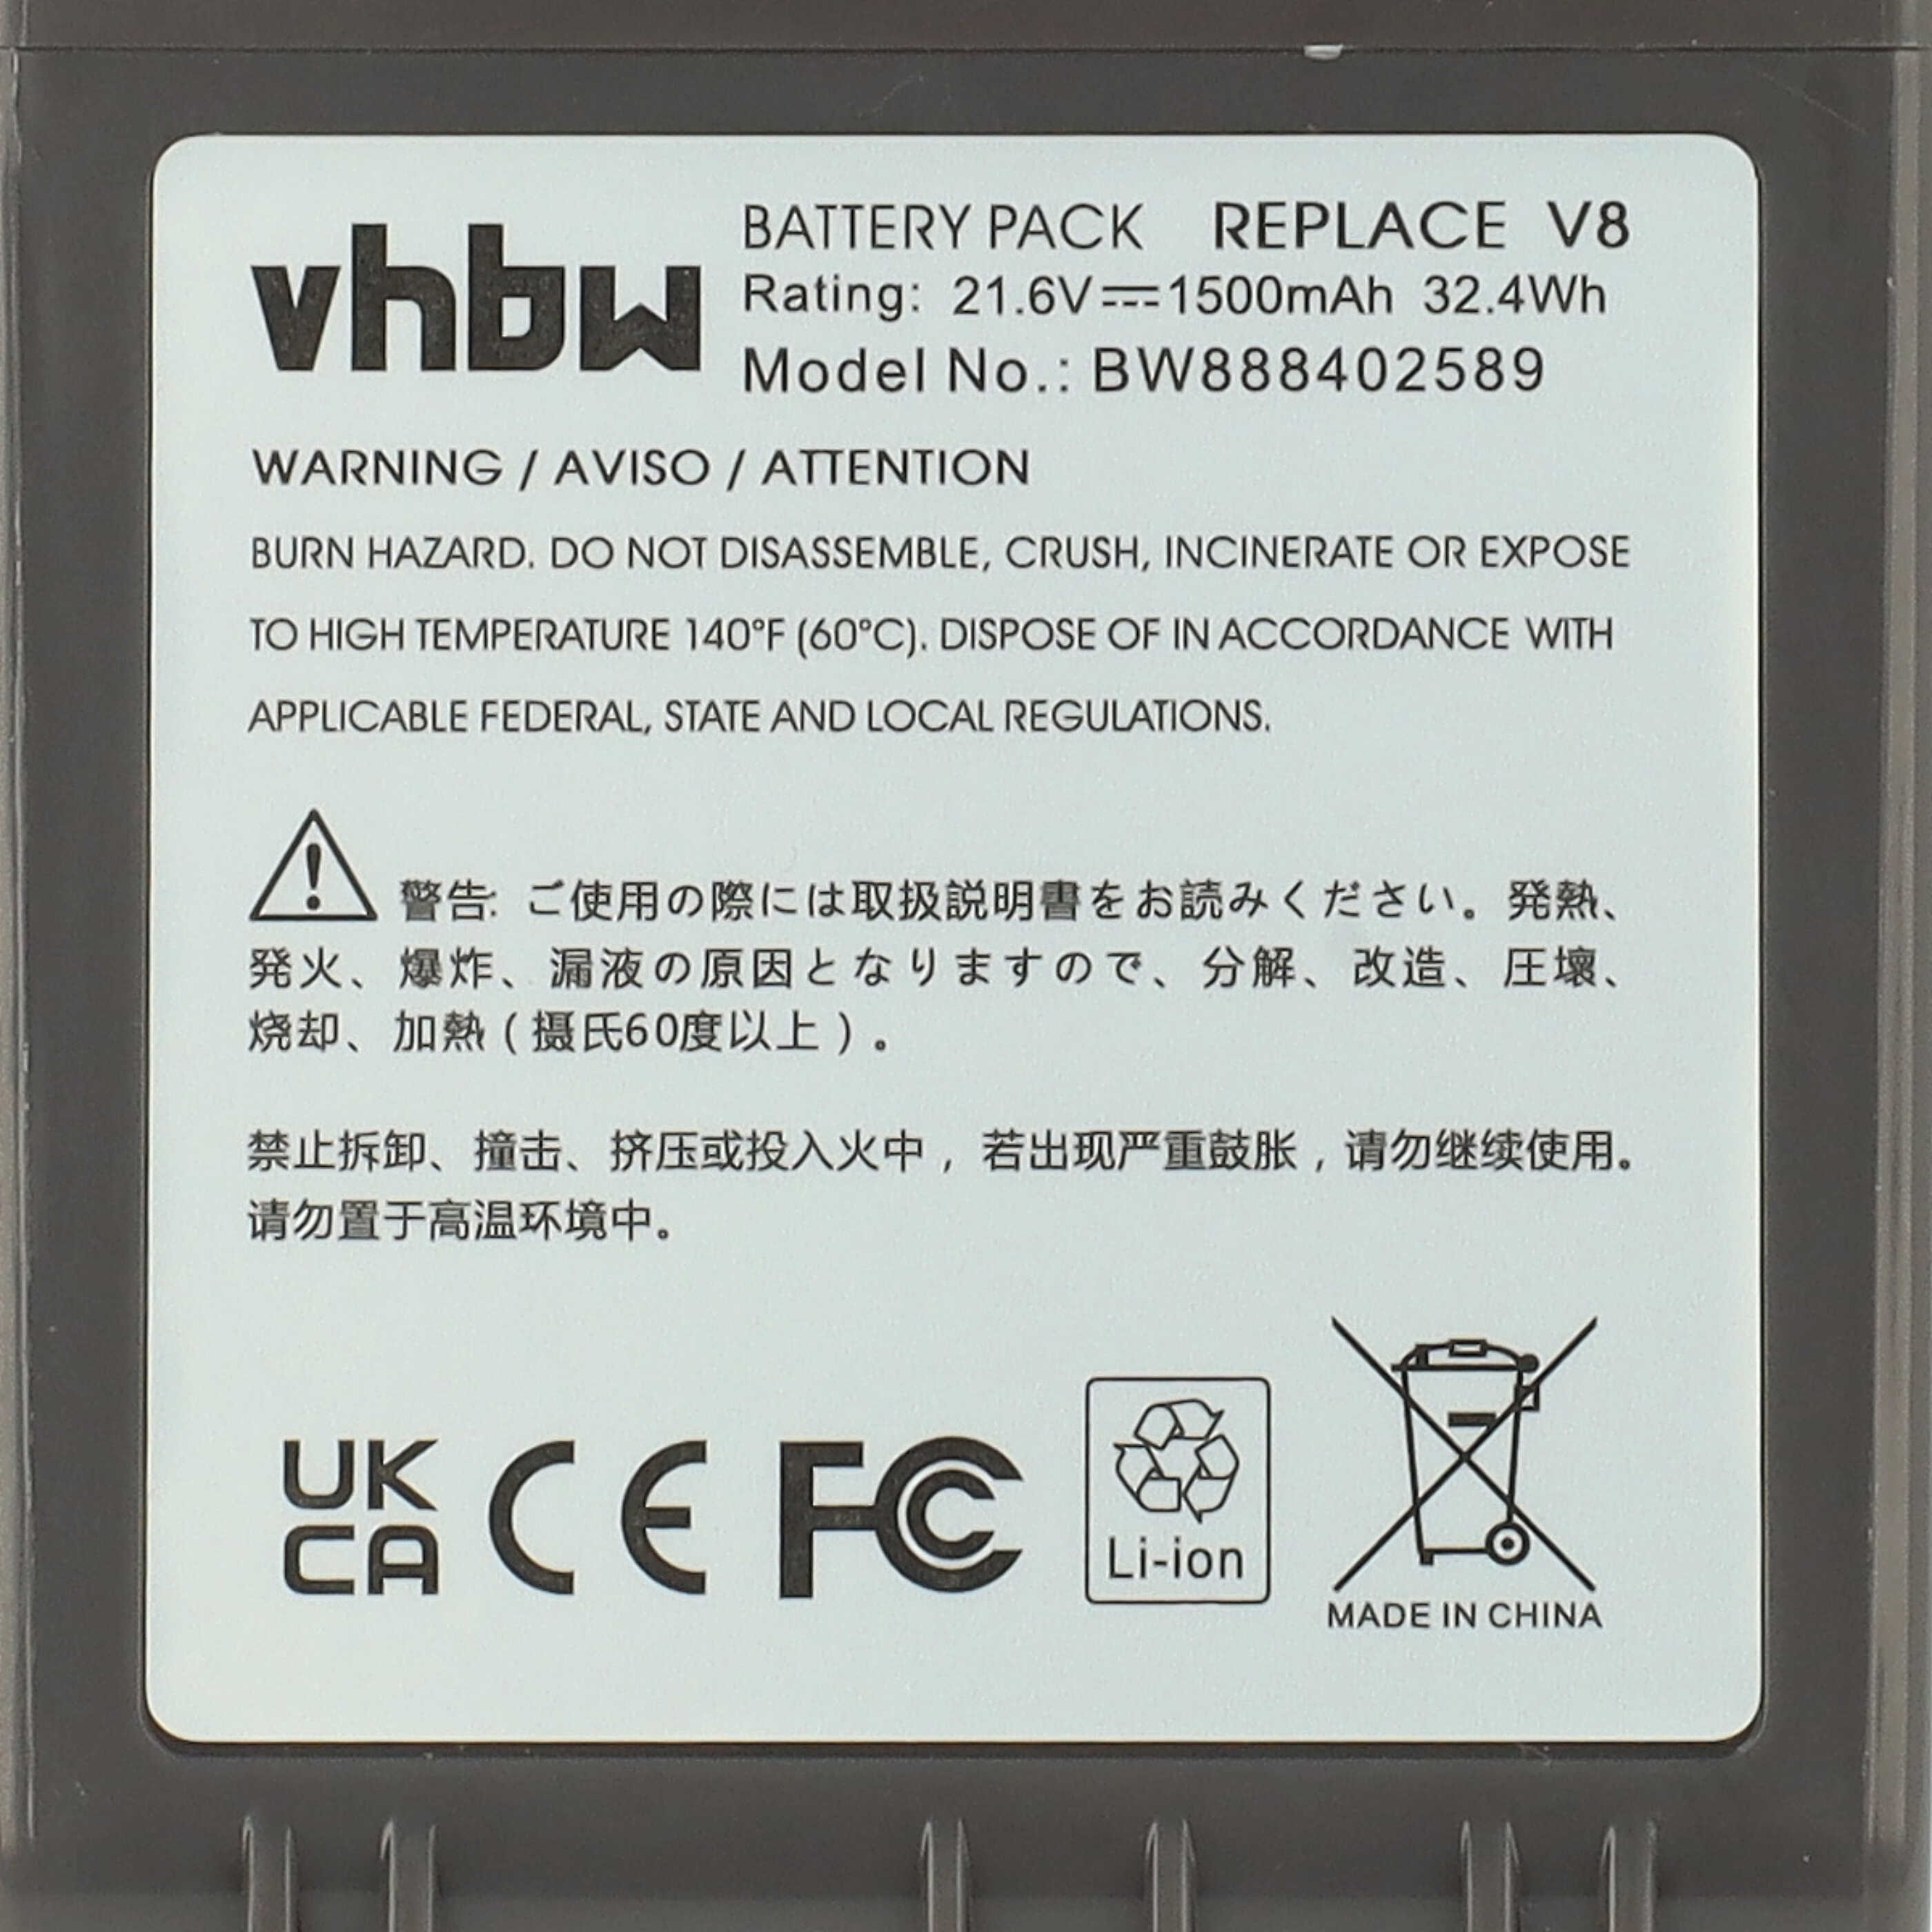 Battery Replacement for Dyson 215967-01/02, 215681, 967834-02, 215866-01/02 for - 1500mAh, 21.6V, Li-Ion